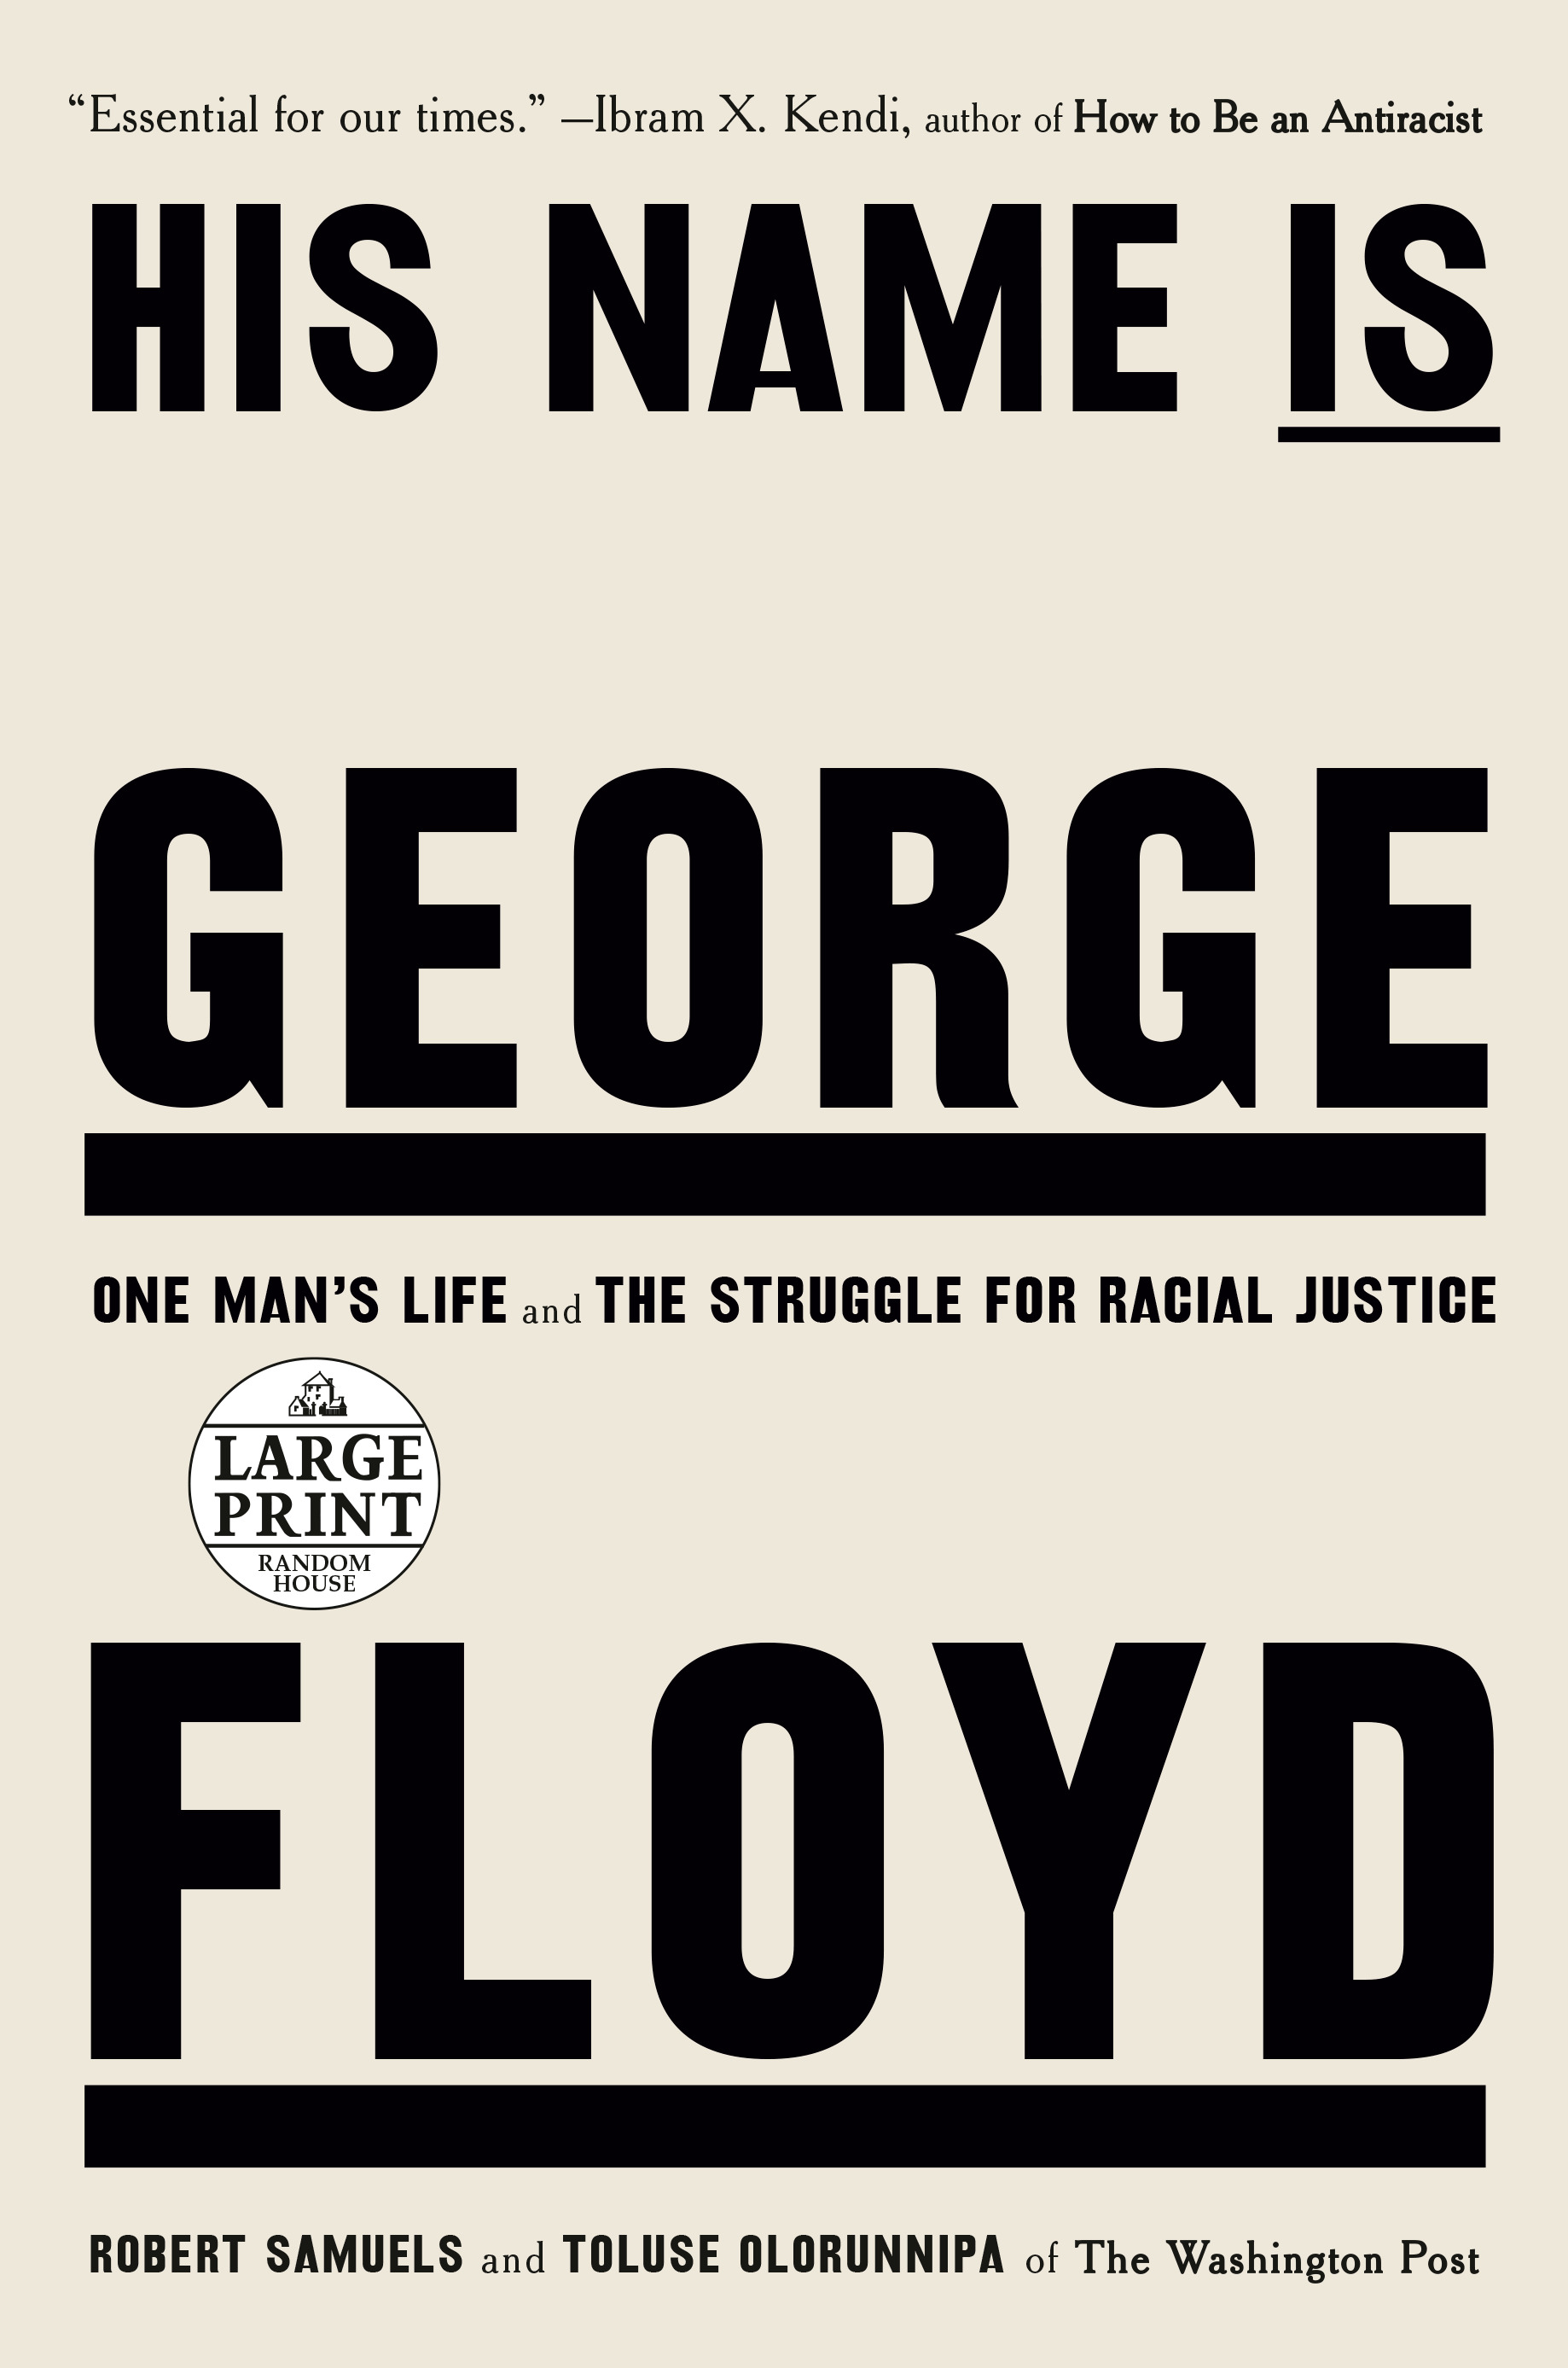 His Name Is George Floyd : One Man's Life and the Struggle for Racial Justice | Samuels, Robert